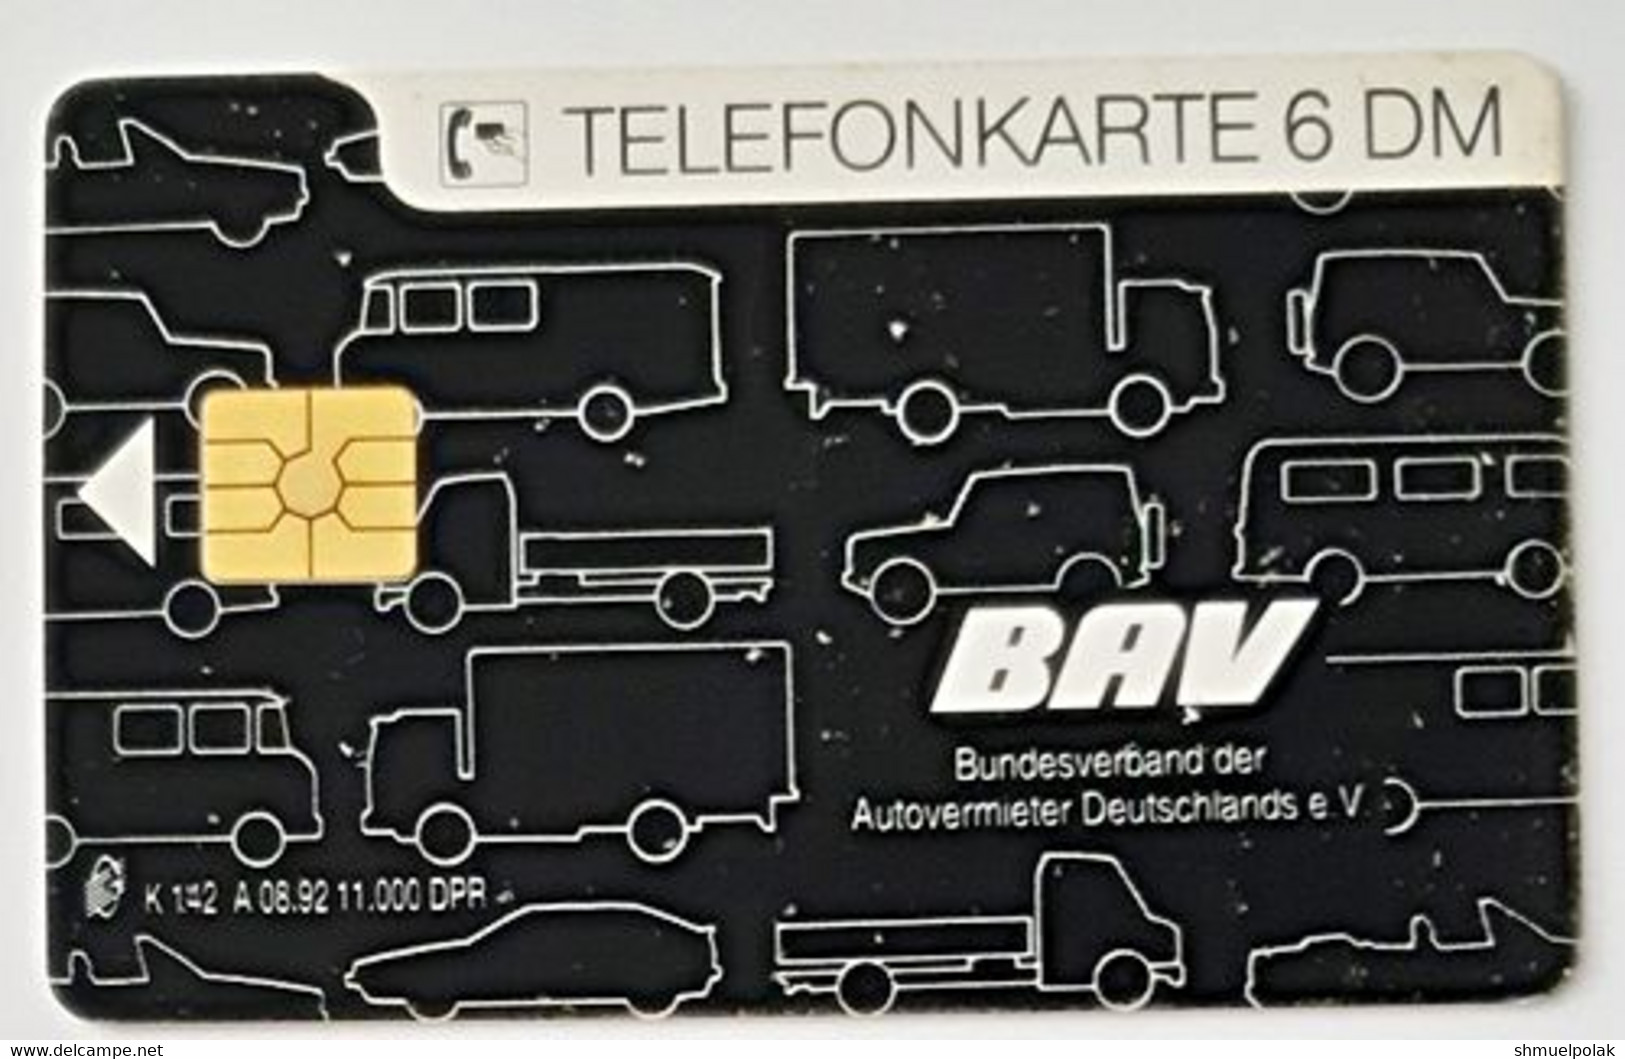 GERMANY Phone Card Telefonkarte Deutsche Telkom 1992 6DM 11000 Units Have Been Issued - Other & Unclassified